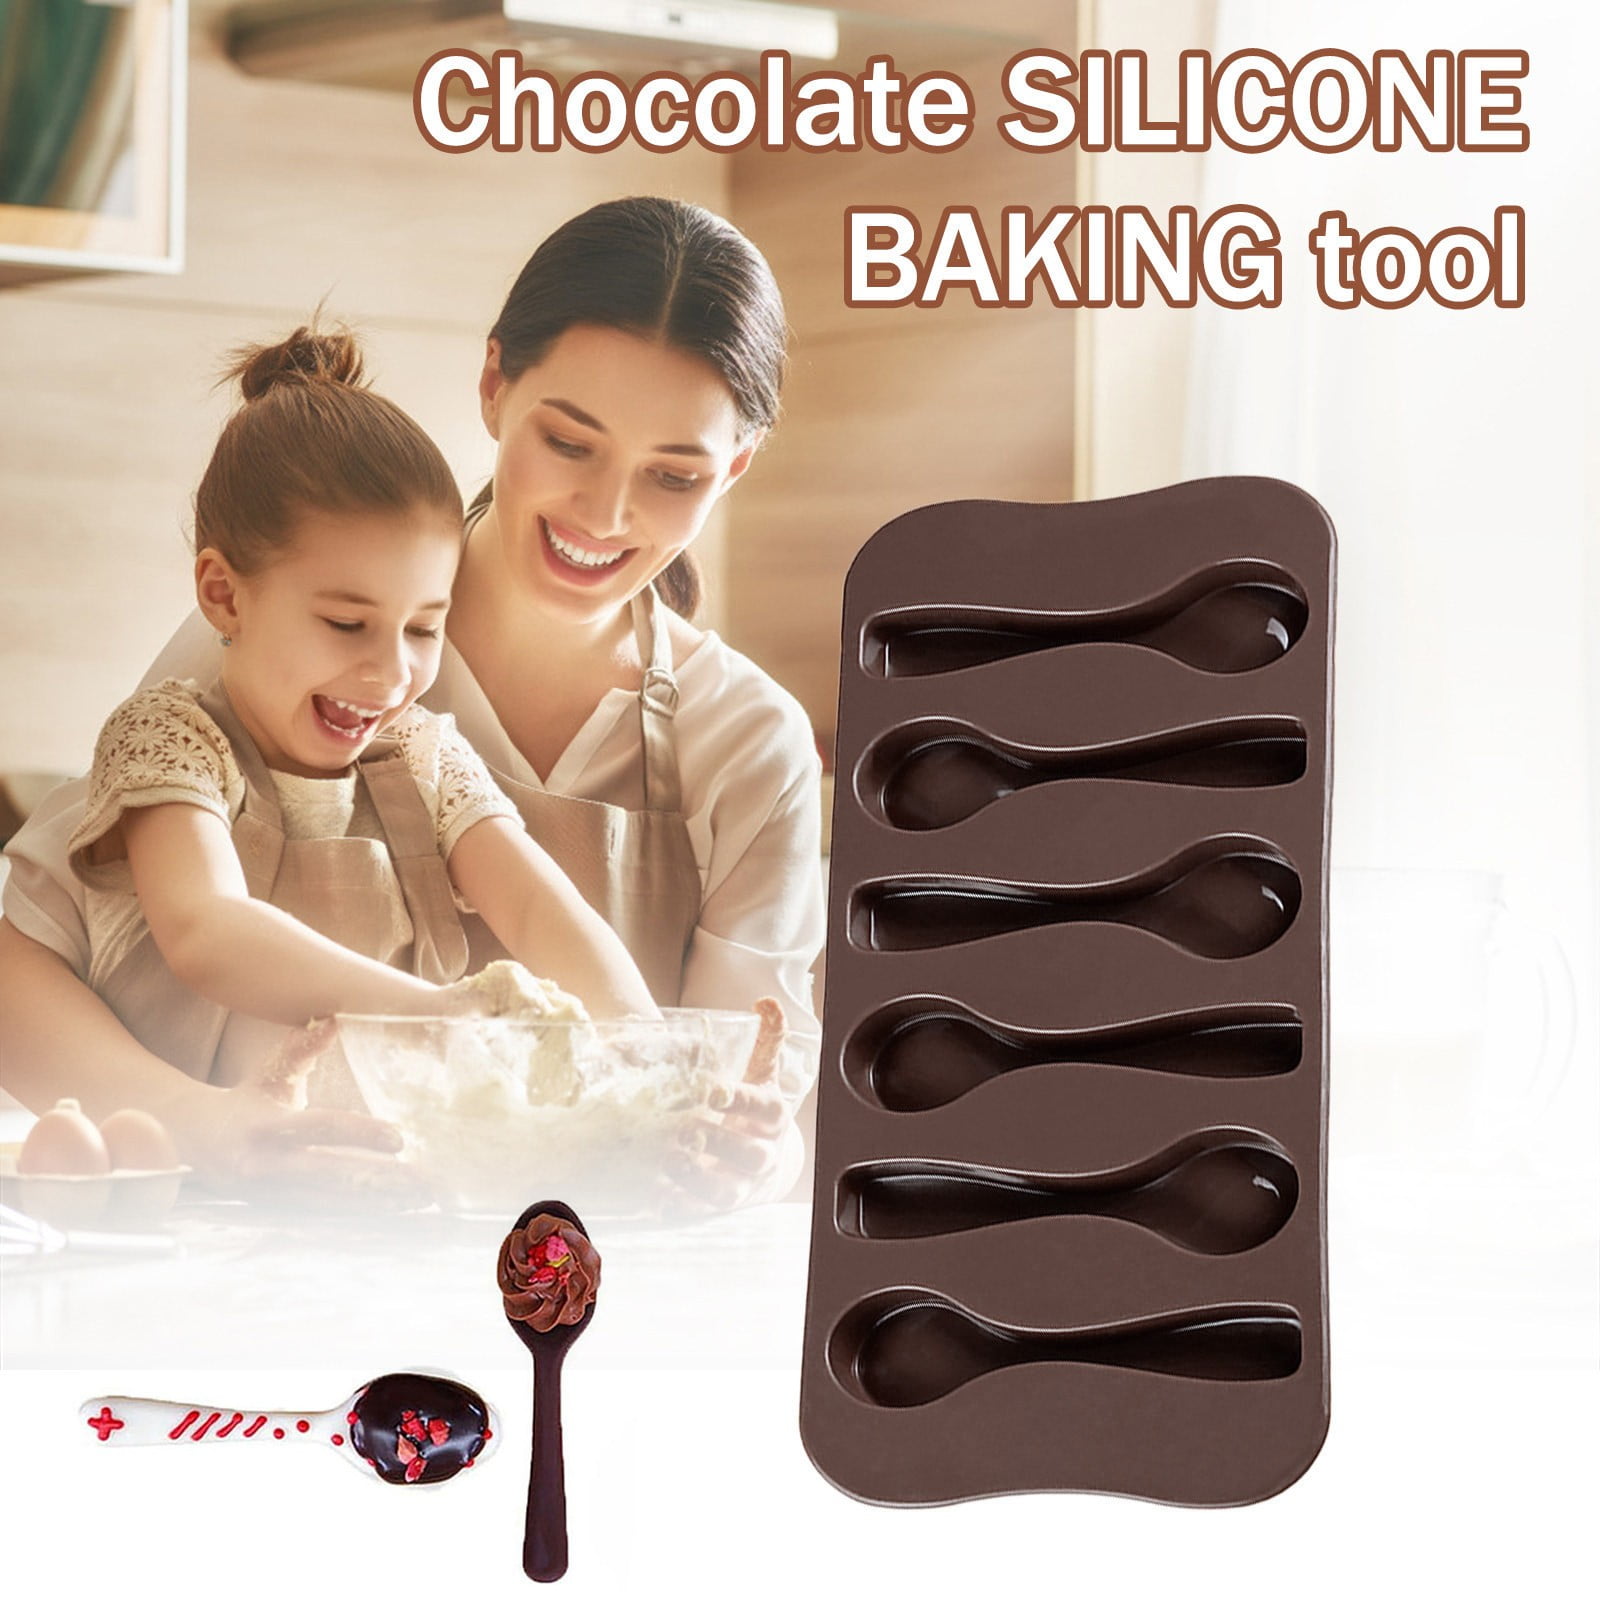 Tool Jelly Mold 6 Spoon Shape Silicone Chocolate Cake Mold Kitchen Baking Tool 